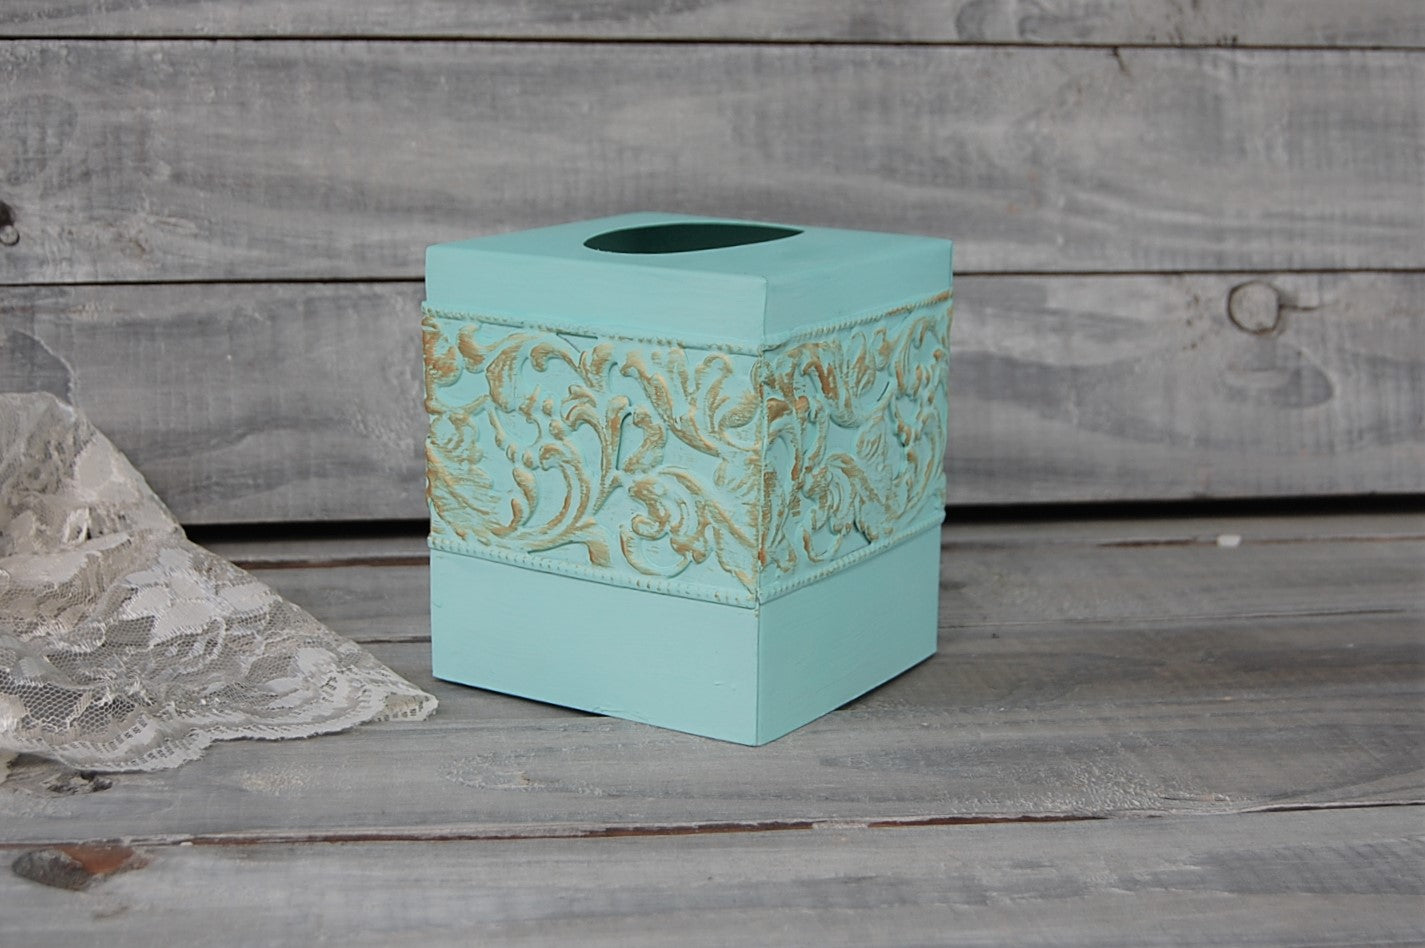 Mint & gold tissue cover